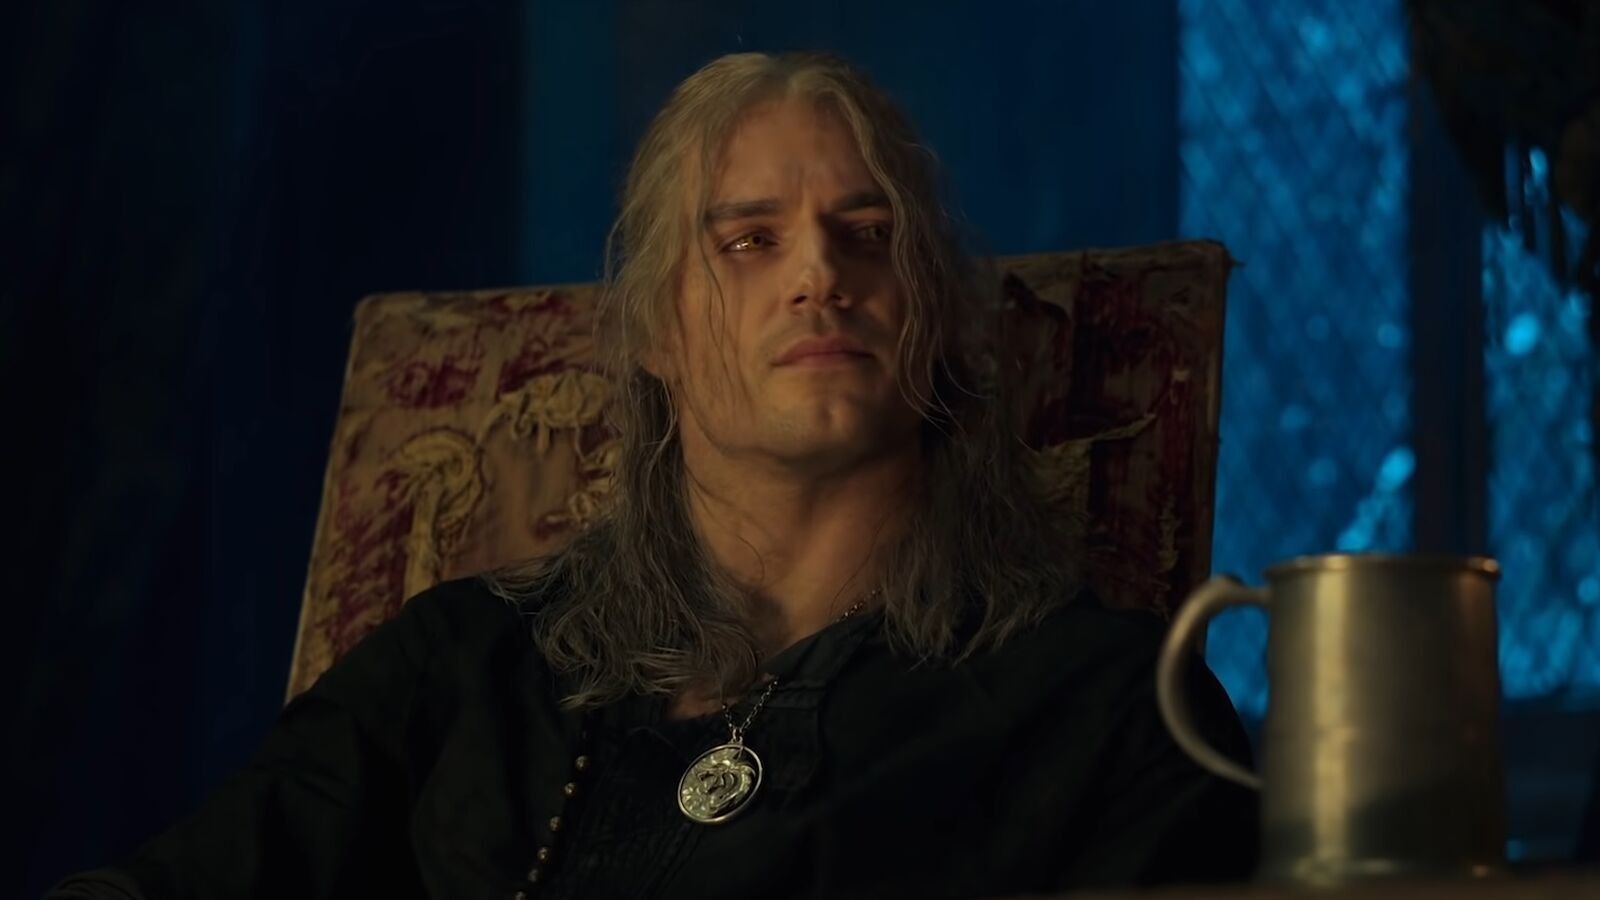 Henry Cavill quitting The Witcher directs criticism toward the show's writers